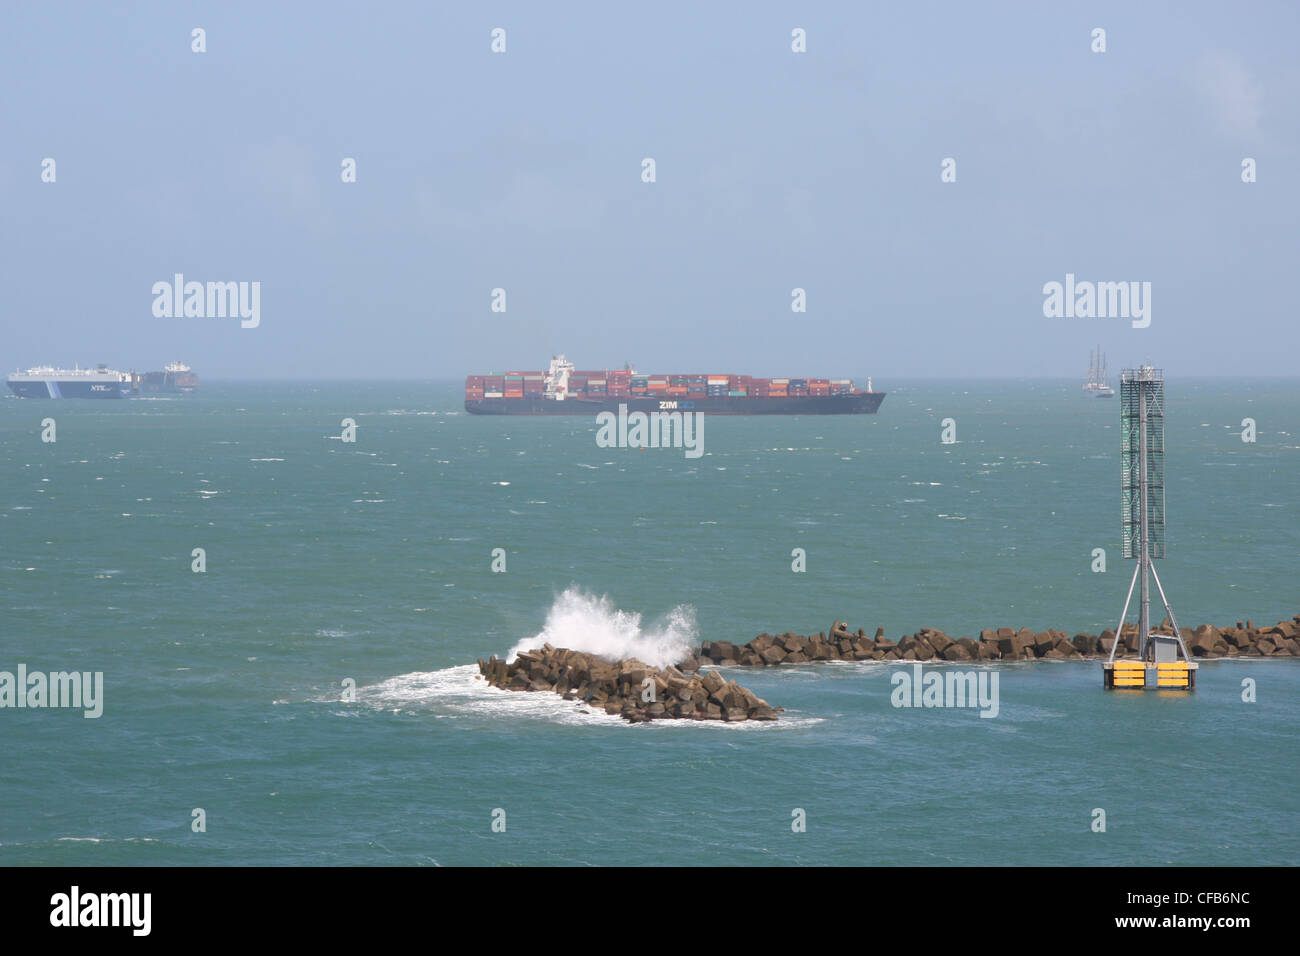 Waves splash on the breakwaters at Colon, Panama, with freighters in the distance. Stock Photo